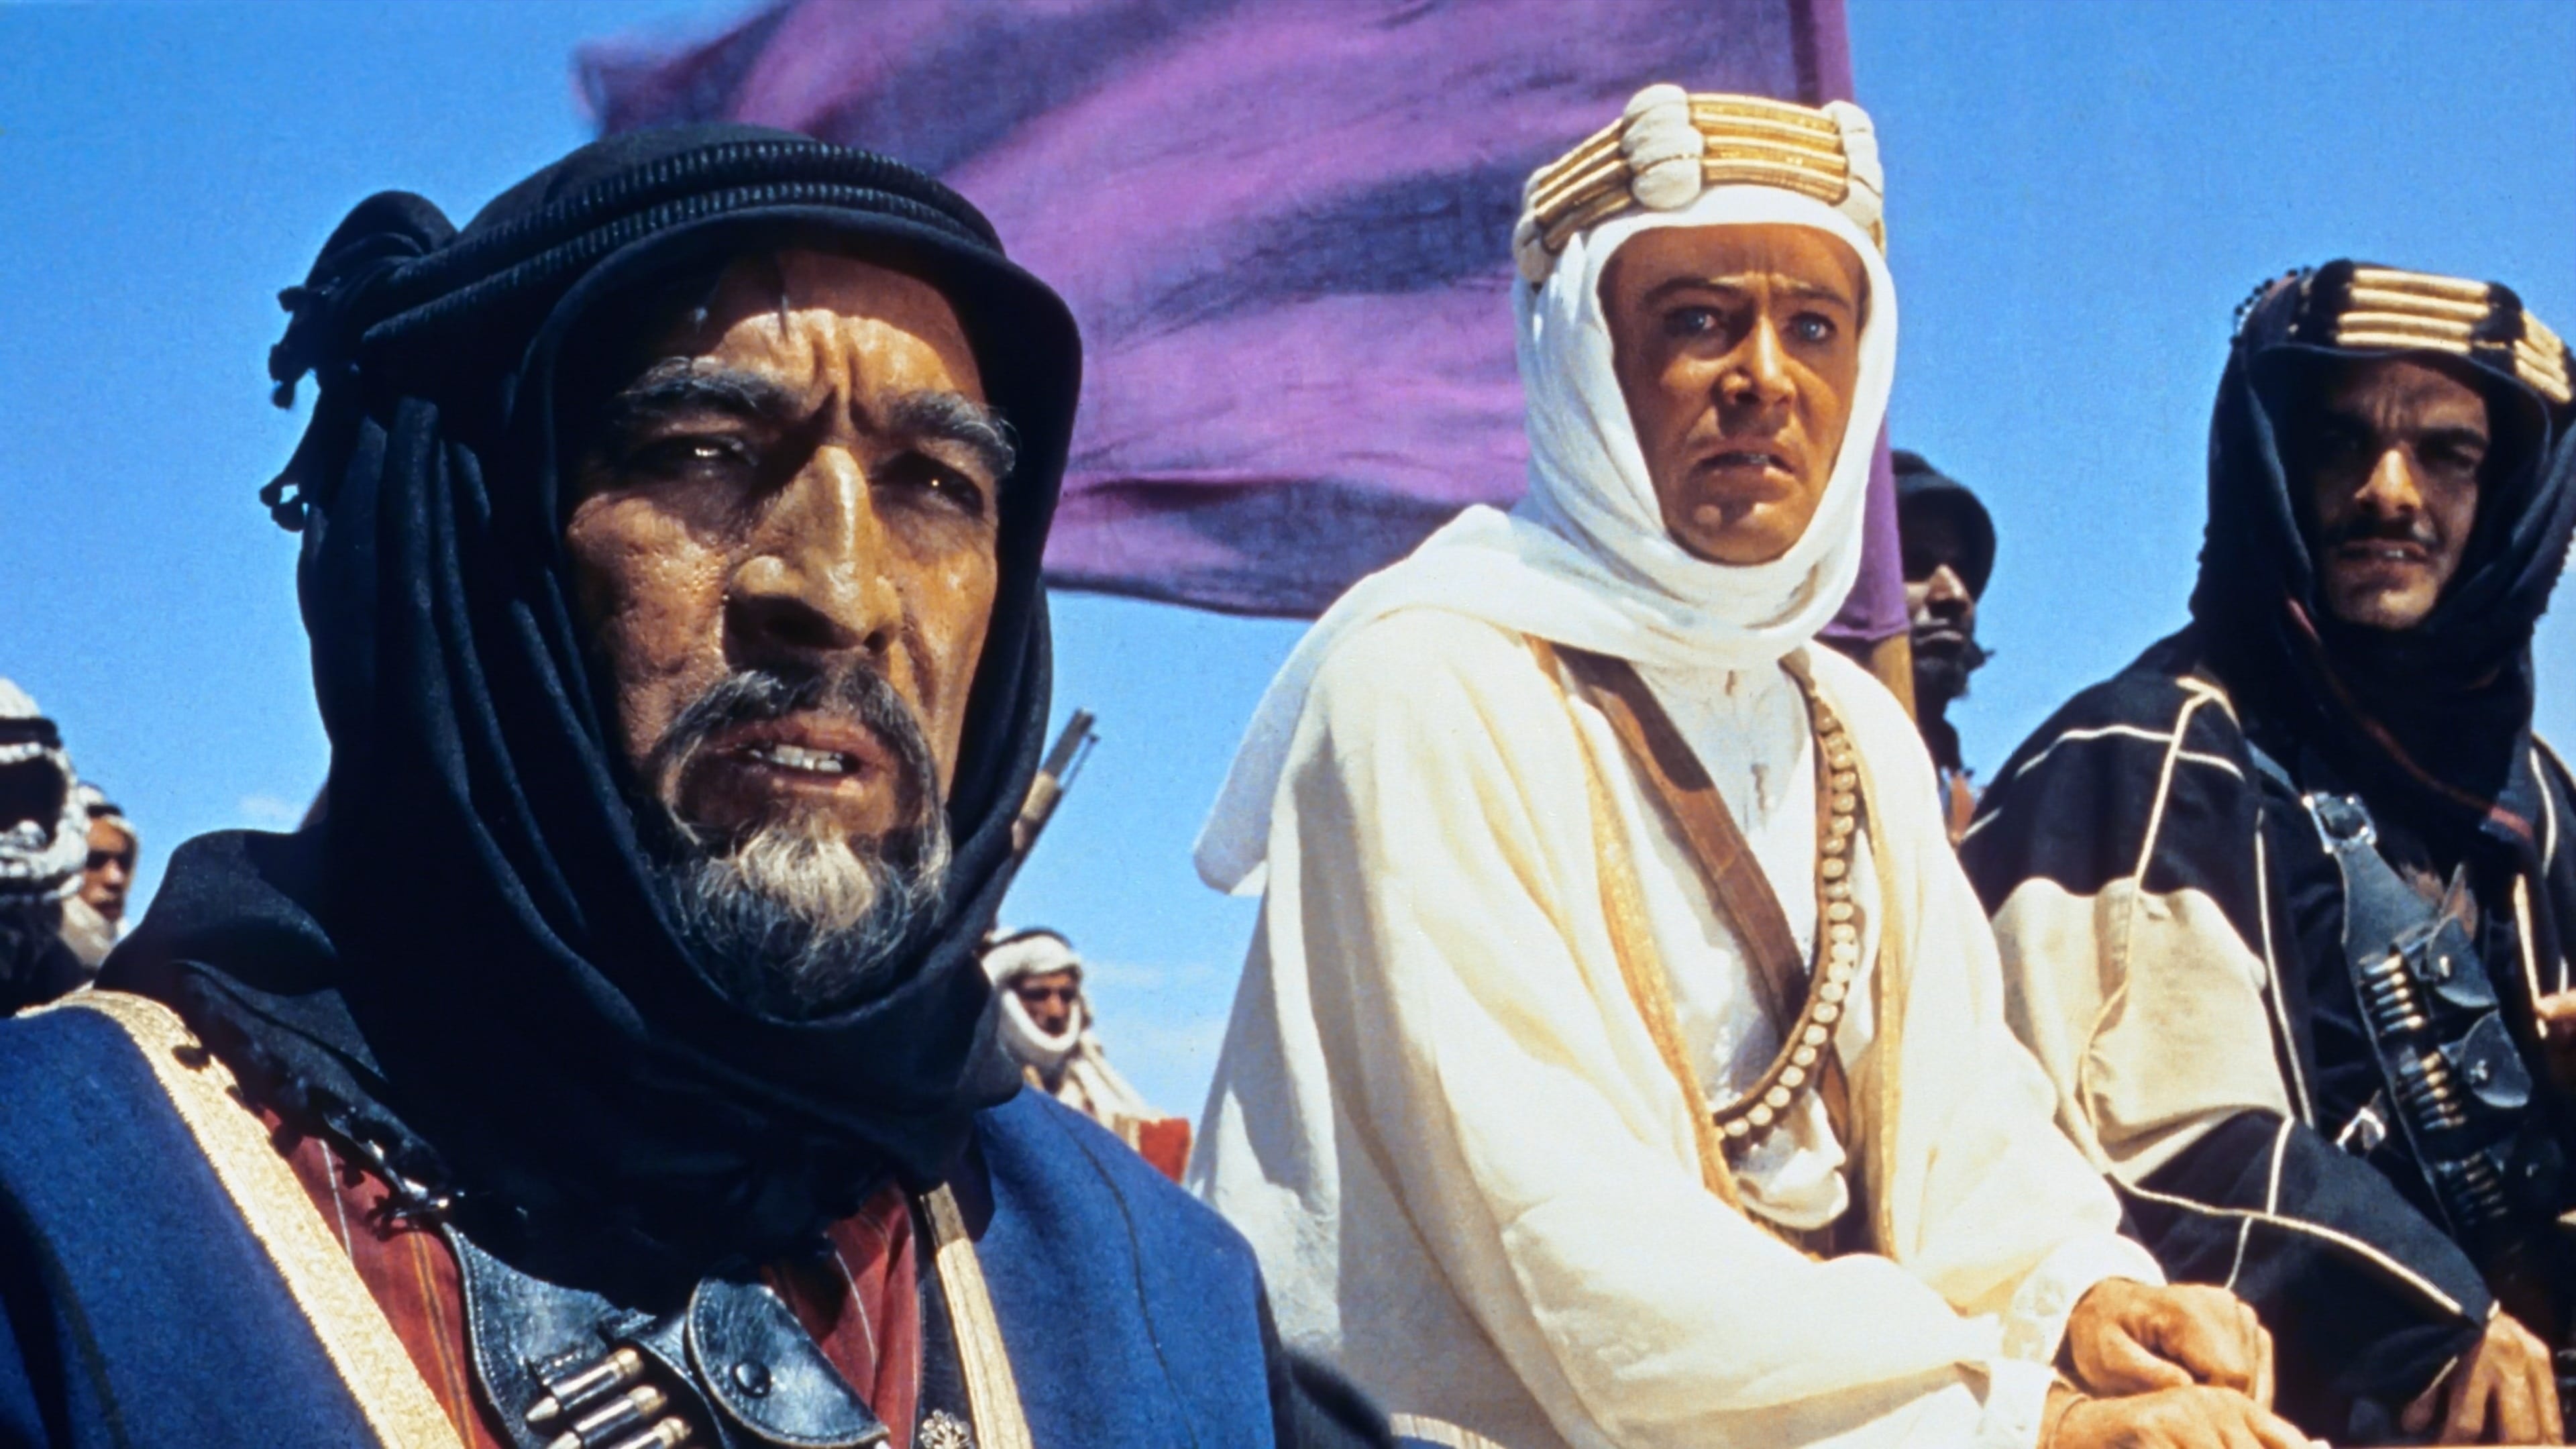 Lawrence of Arabia 1962 123movies